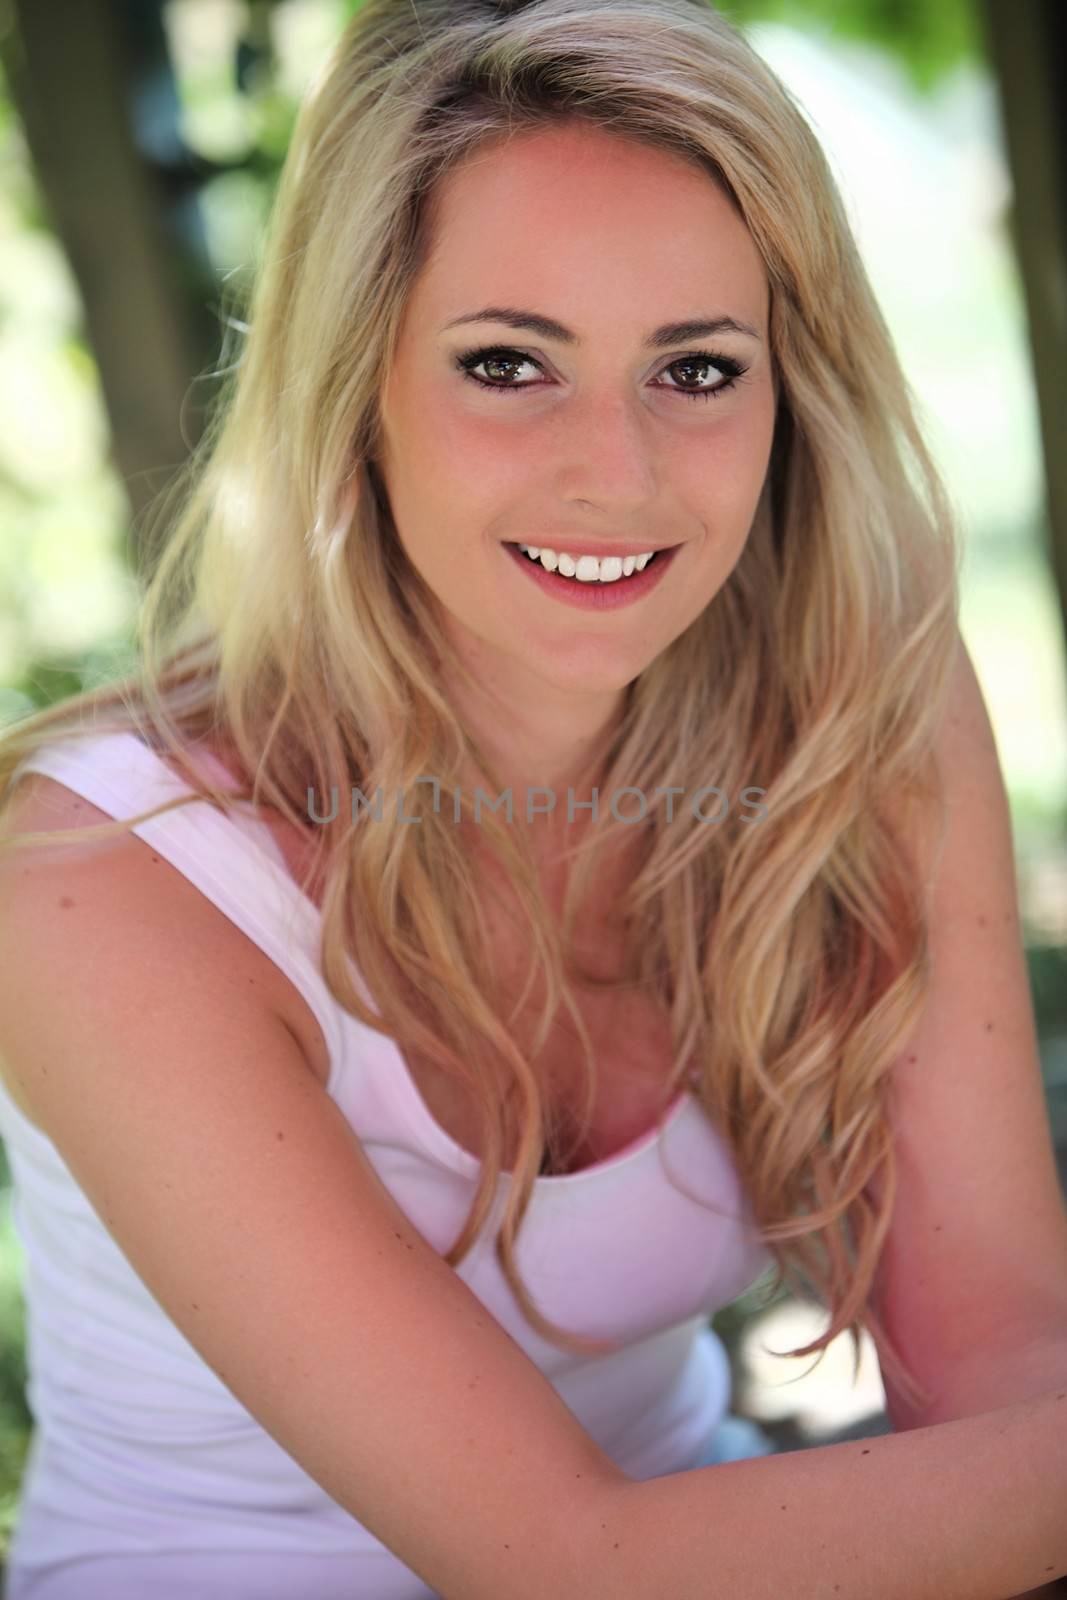 Beautiful blond woman sitting outdoors in the shade of a tree in a cool summer top